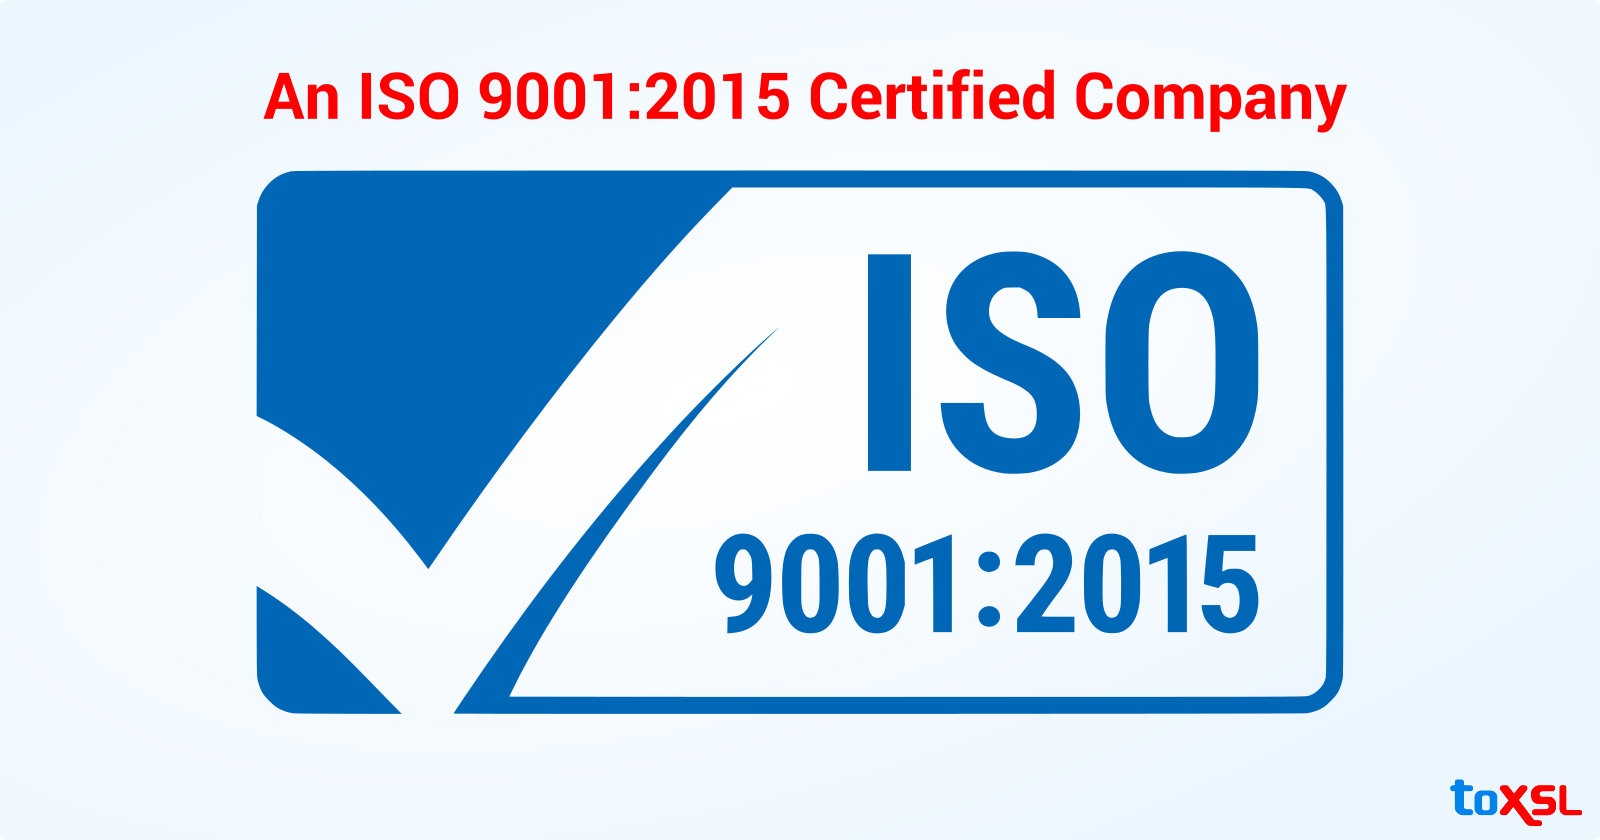 We have been awarded ISO: 9001:2015 certification!